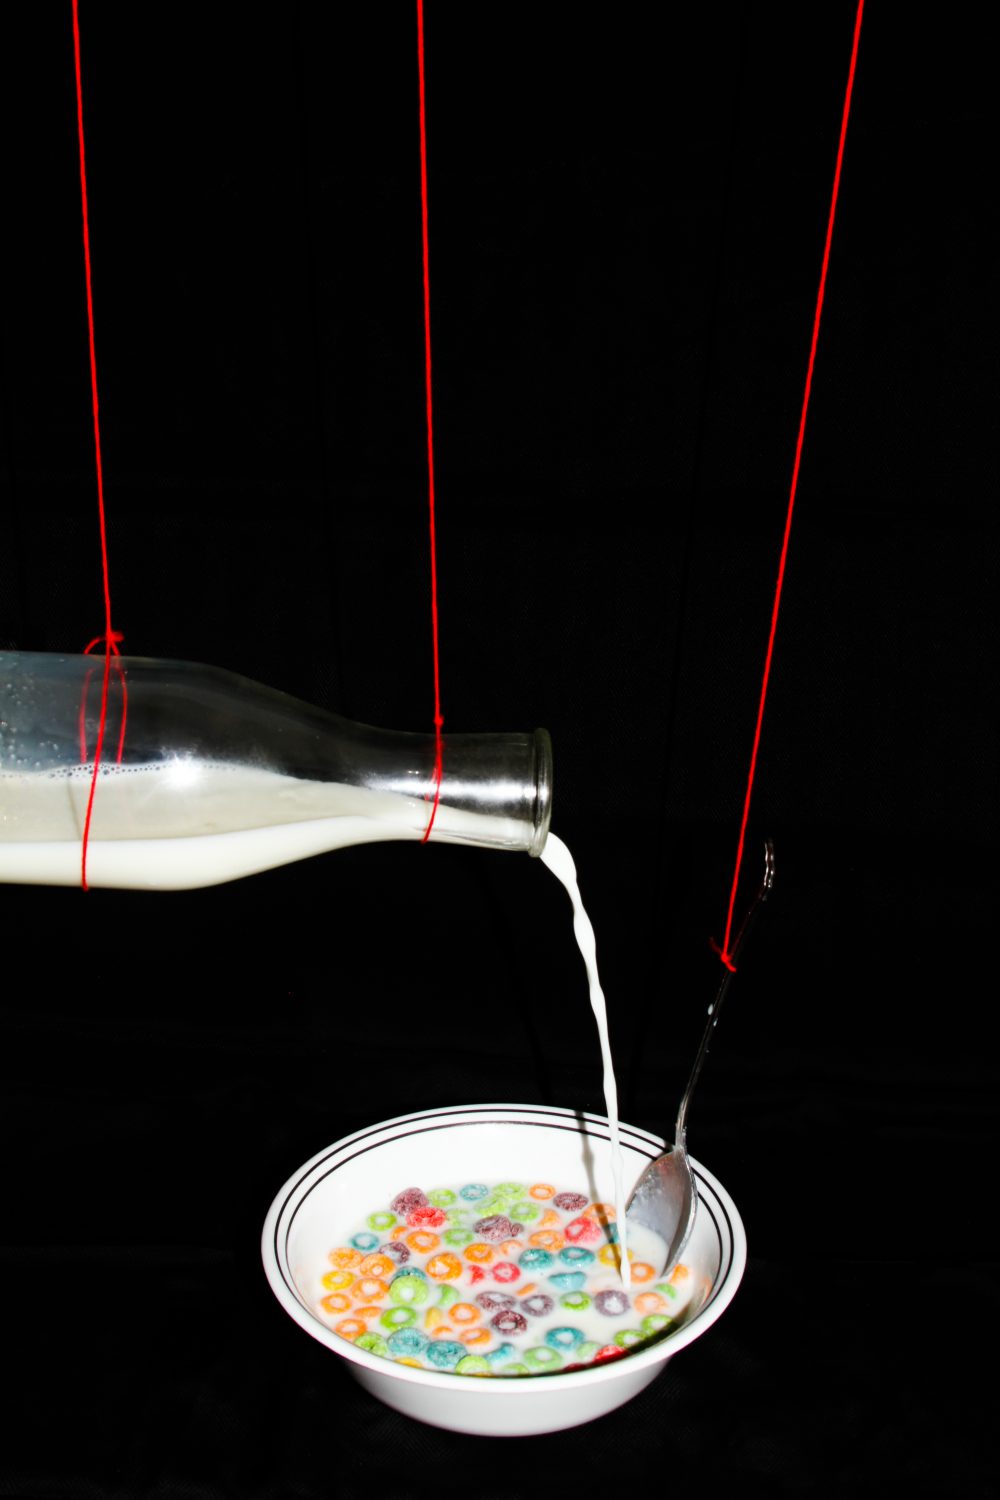 A bowl of cereal and a glass of milk held up by bright red strings, with the milk pouring in to the bowl. The images are surrounded by black so they appear to float in space.